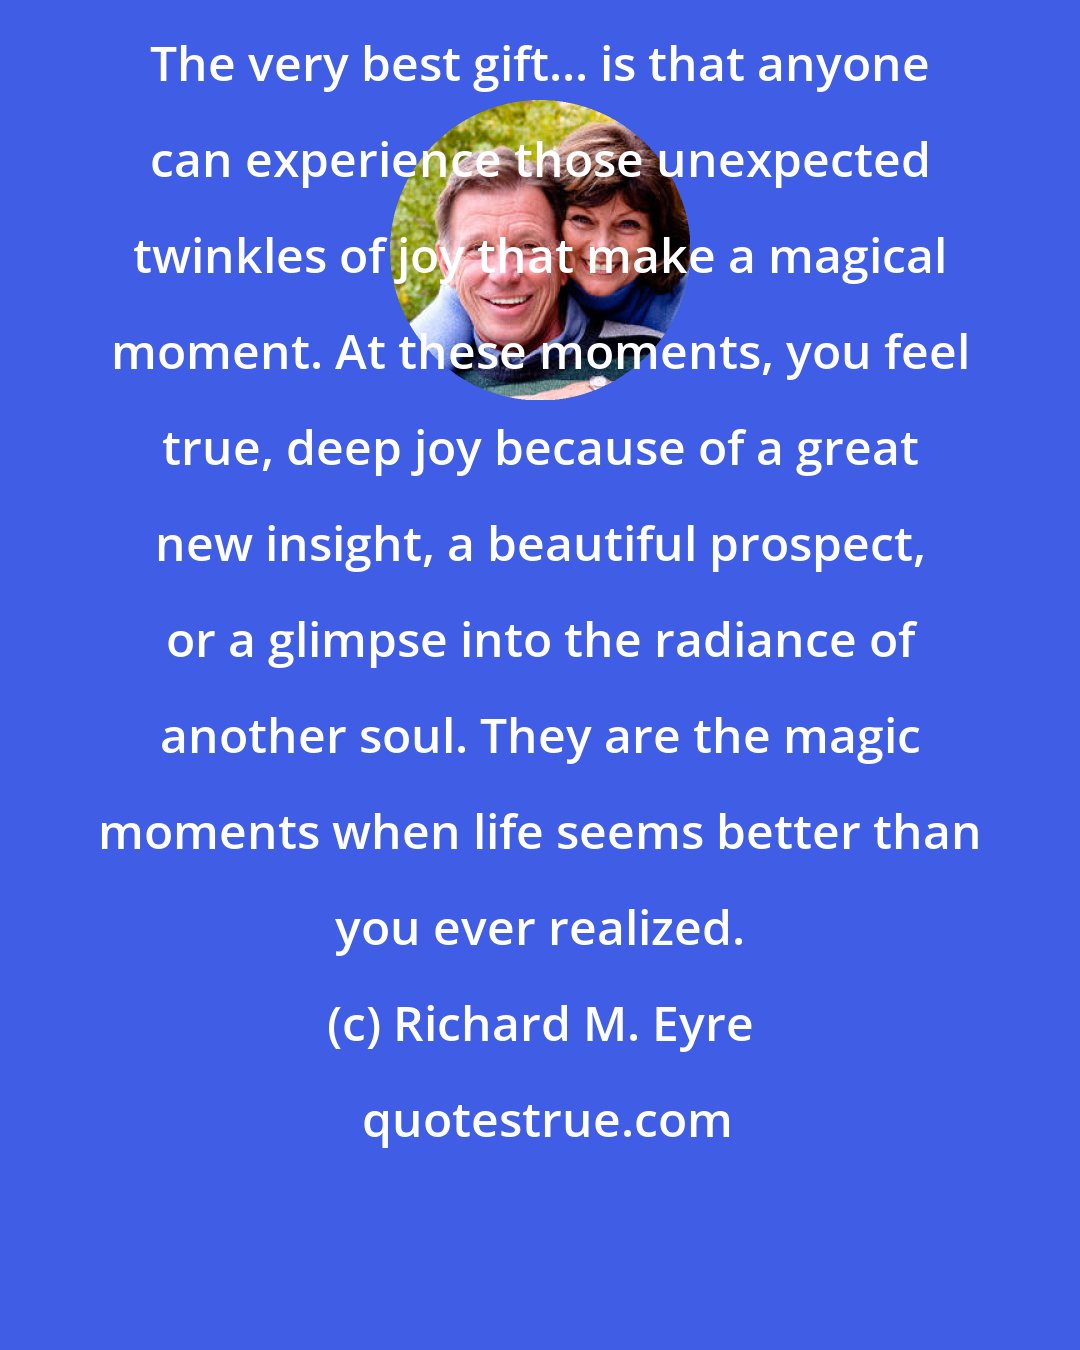 Richard M. Eyre: The very best gift... is that anyone can experience those unexpected twinkles of joy that make a magical moment. At these moments, you feel true, deep joy because of a great new insight, a beautiful prospect, or a glimpse into the radiance of another soul. They are the magic moments when life seems better than you ever realized.